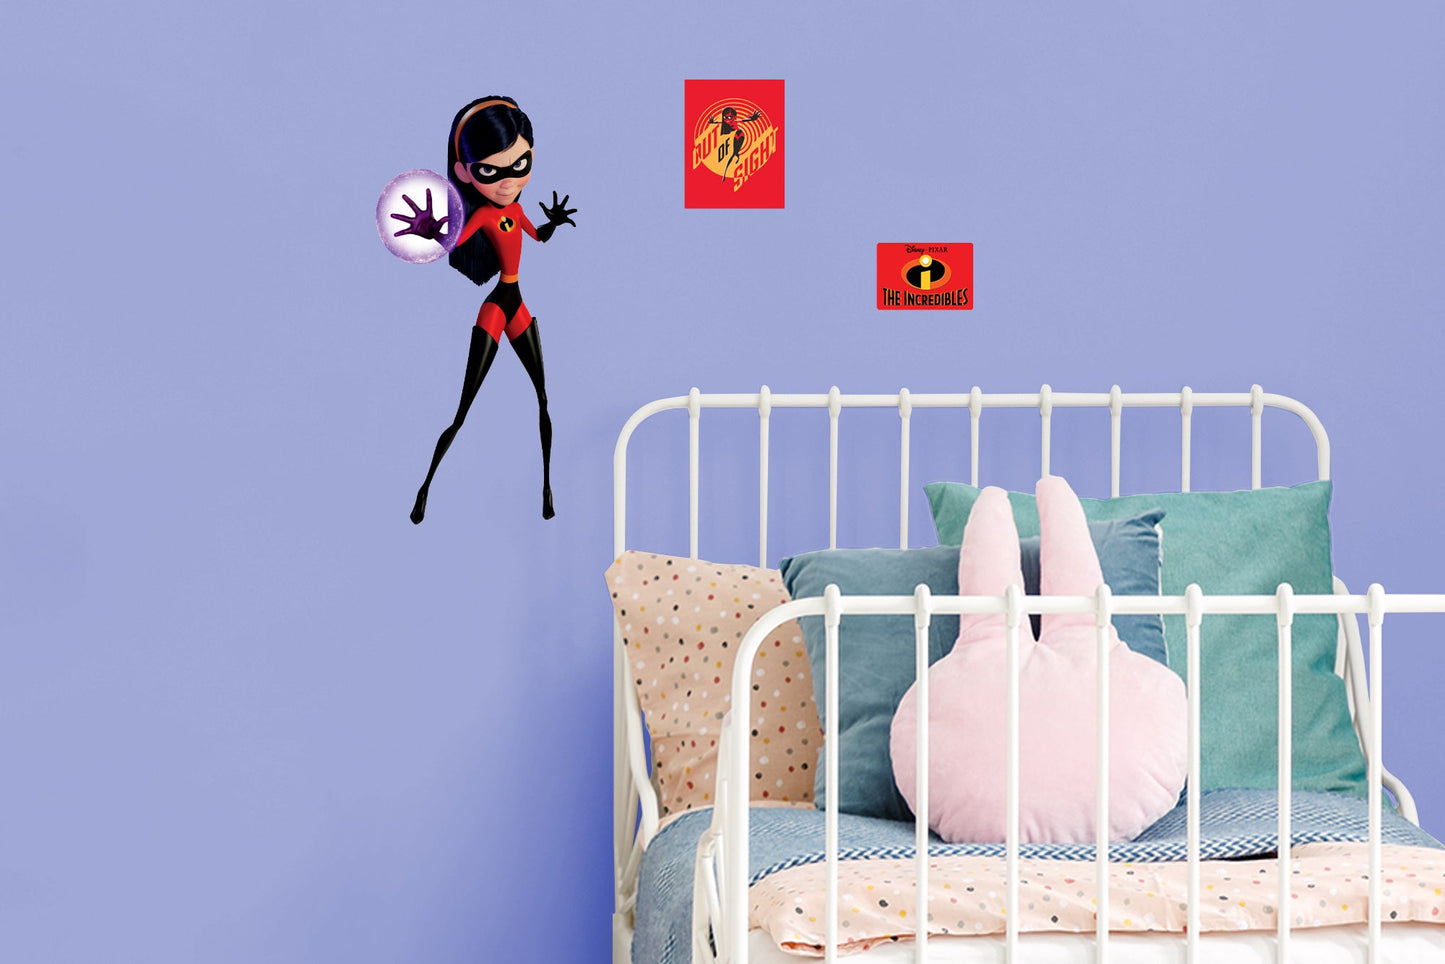 Incredibles 2: Violet Parr RealBig        - Officially Licensed Disney Removable     Adhesive Decal